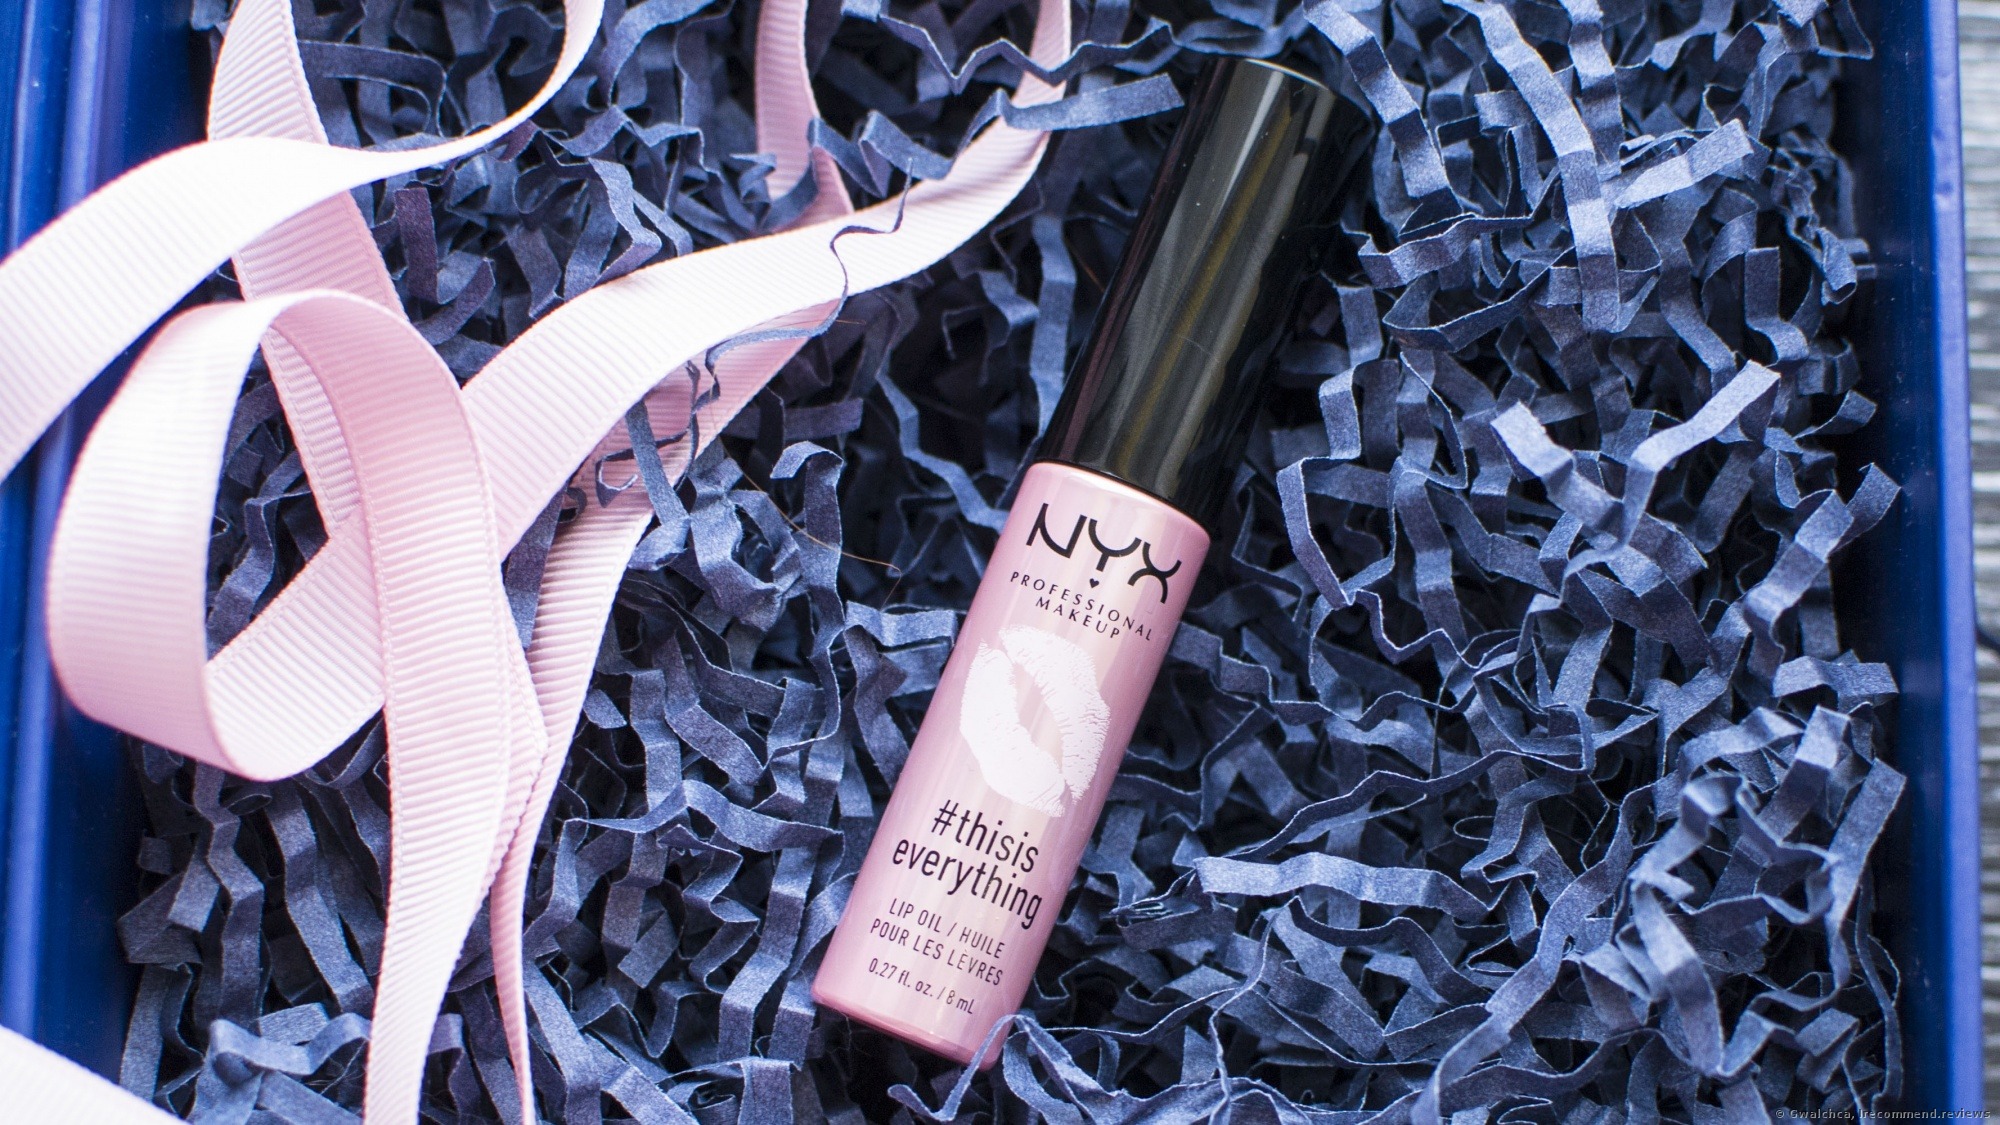 NYX #THISISEVERYTHING Lip Oil - «Pour some oil! A reasonably priced dupe  for the famous Clarins oil. Result on chapped lips after a week with # thisiseverything»